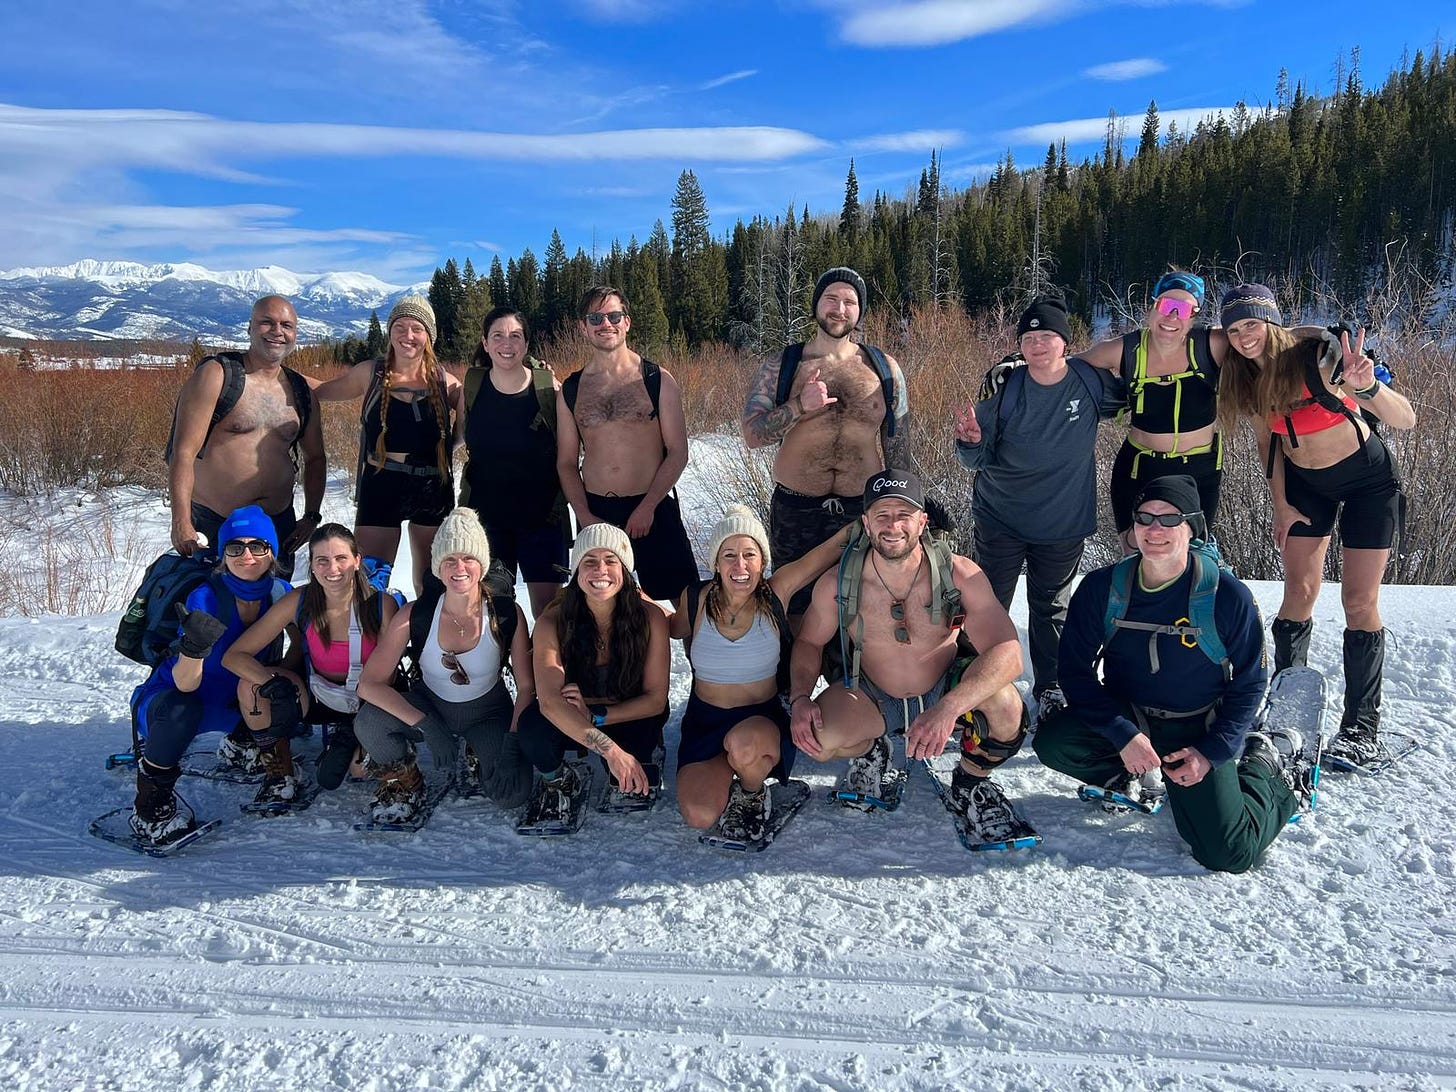 Group photo of happy people in snowshoes and minimal athletic clothes, mountains in background